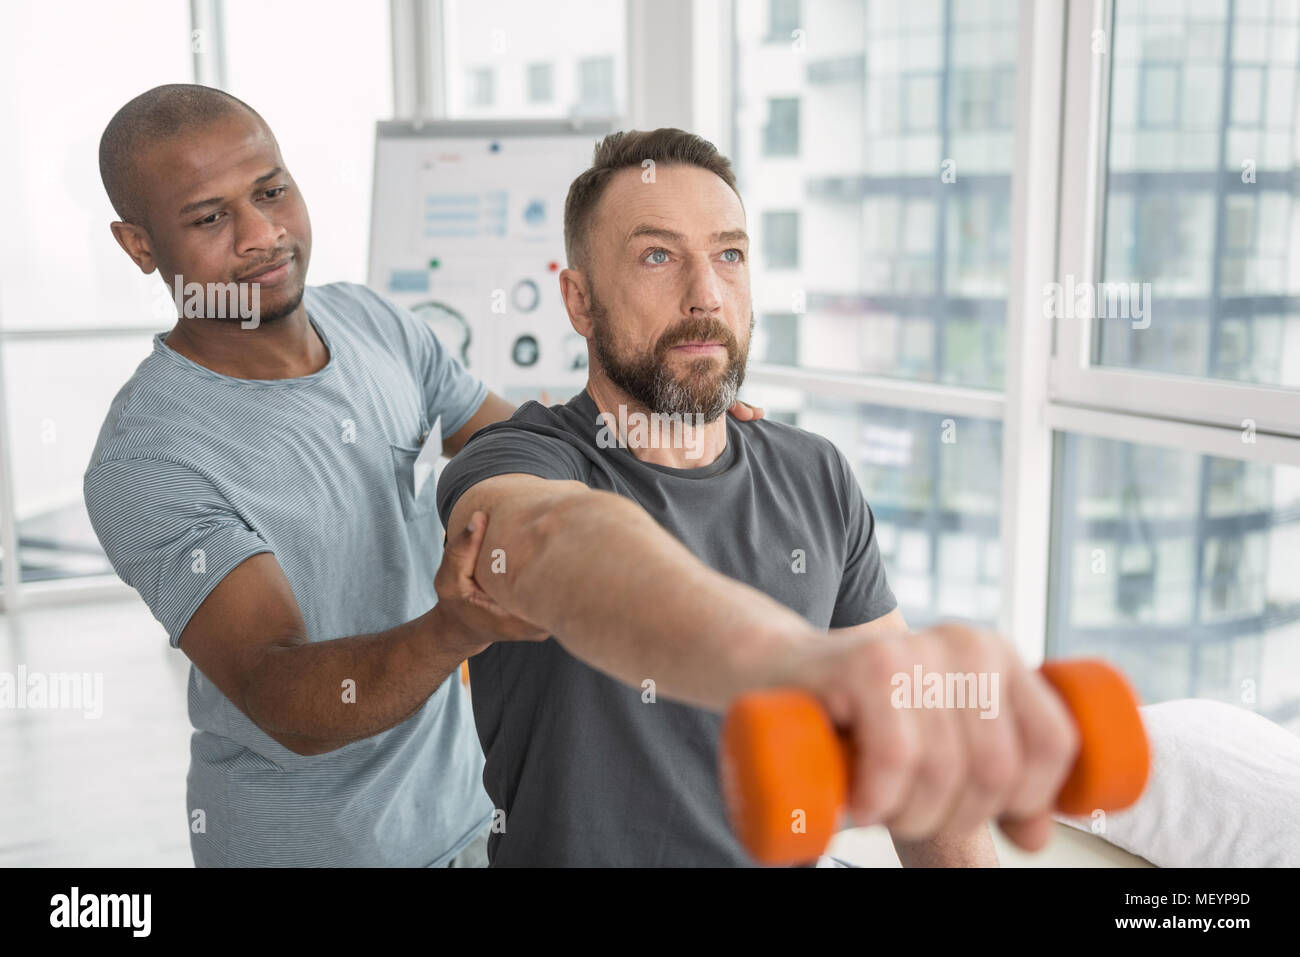 Nice adult man doing a physical exercise Stock Photo